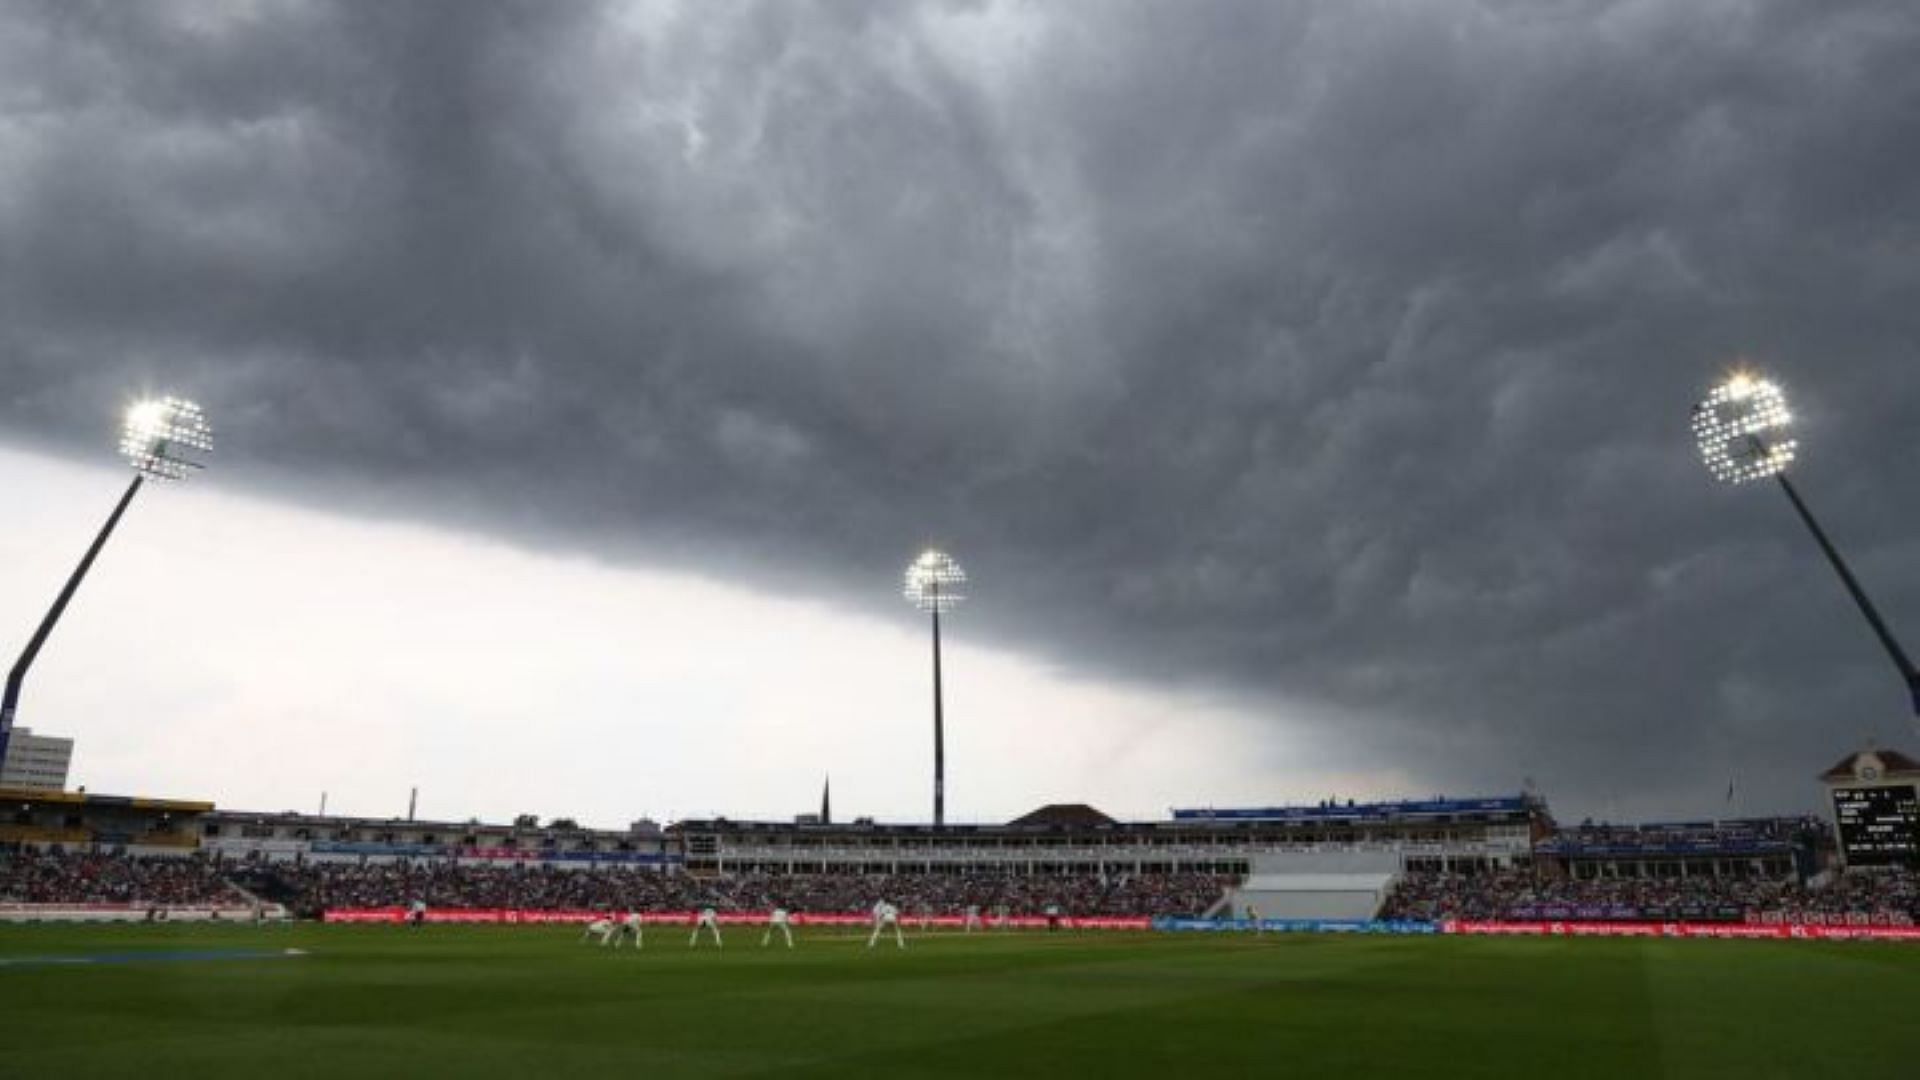 Weather played spoilsport on Day 3 of the first Ashes Test